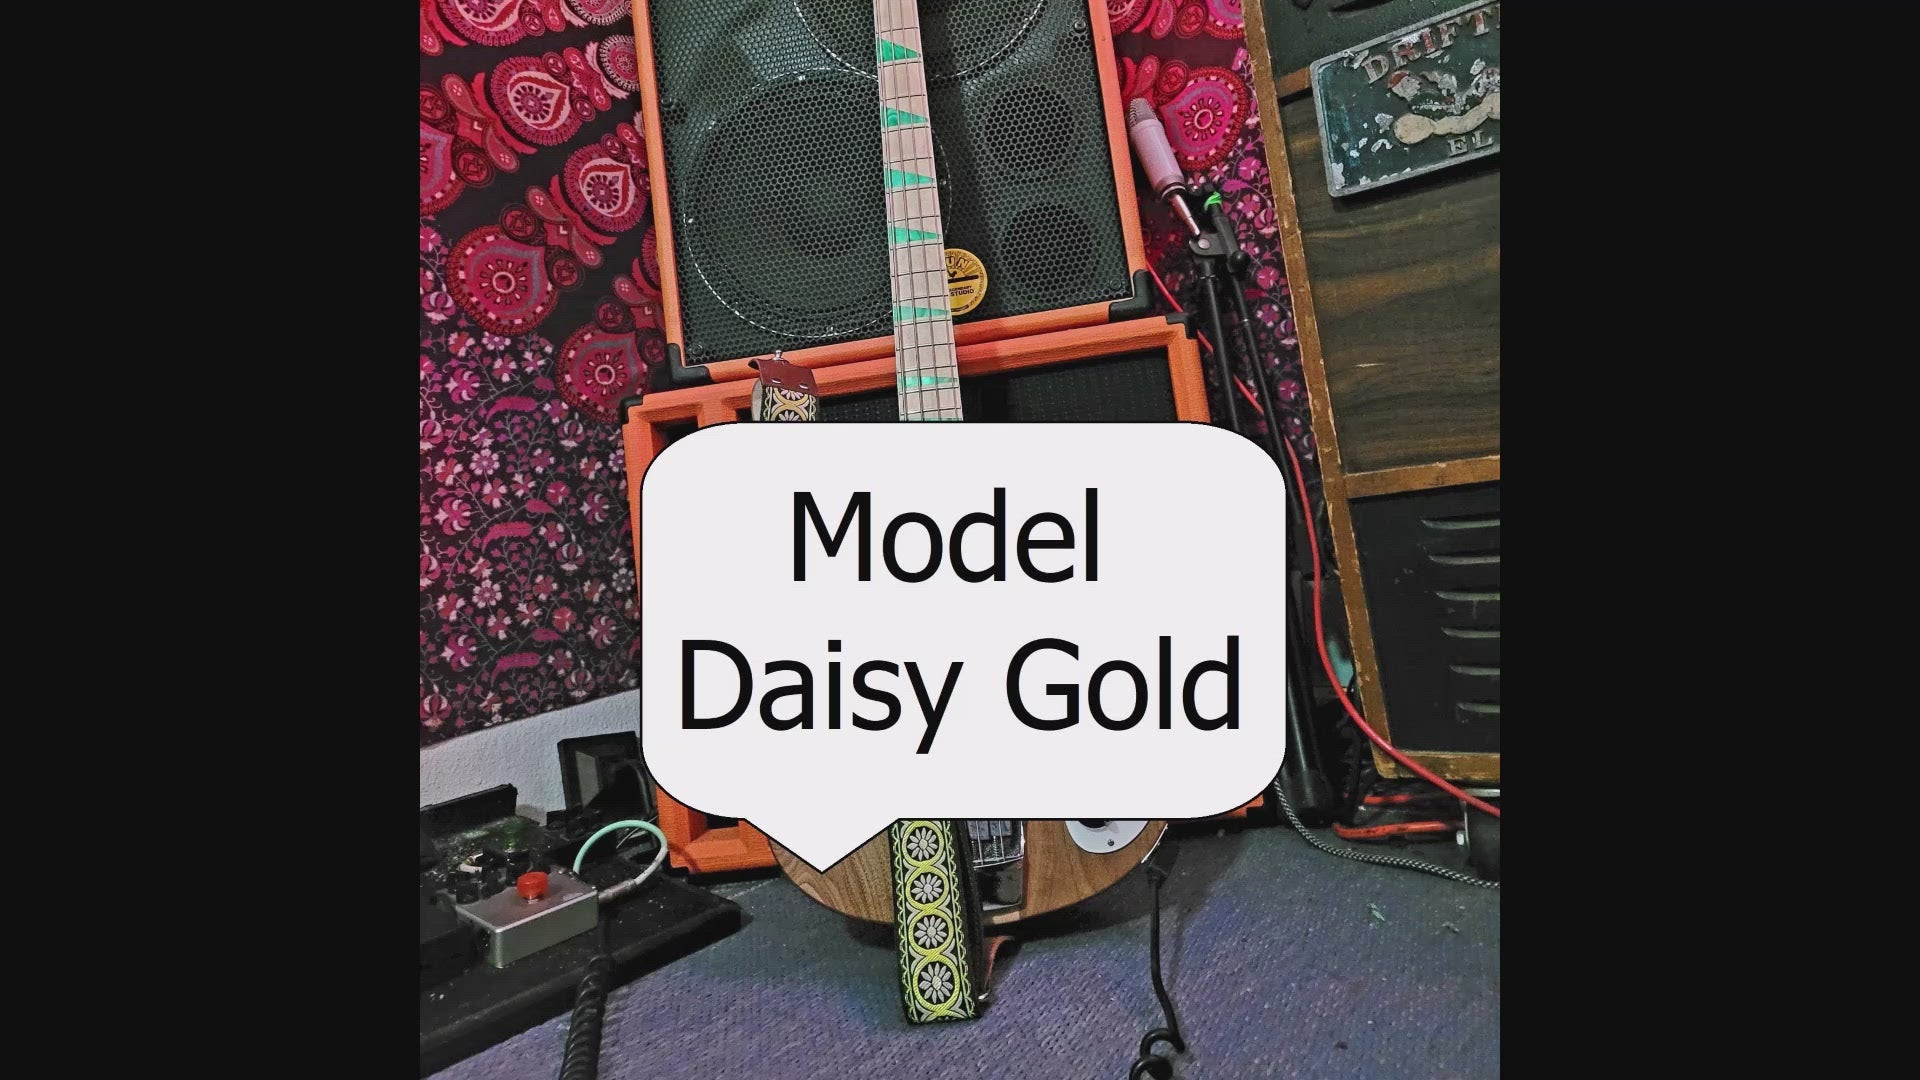 Guitar strap with gold flowers, model Daisy Gold